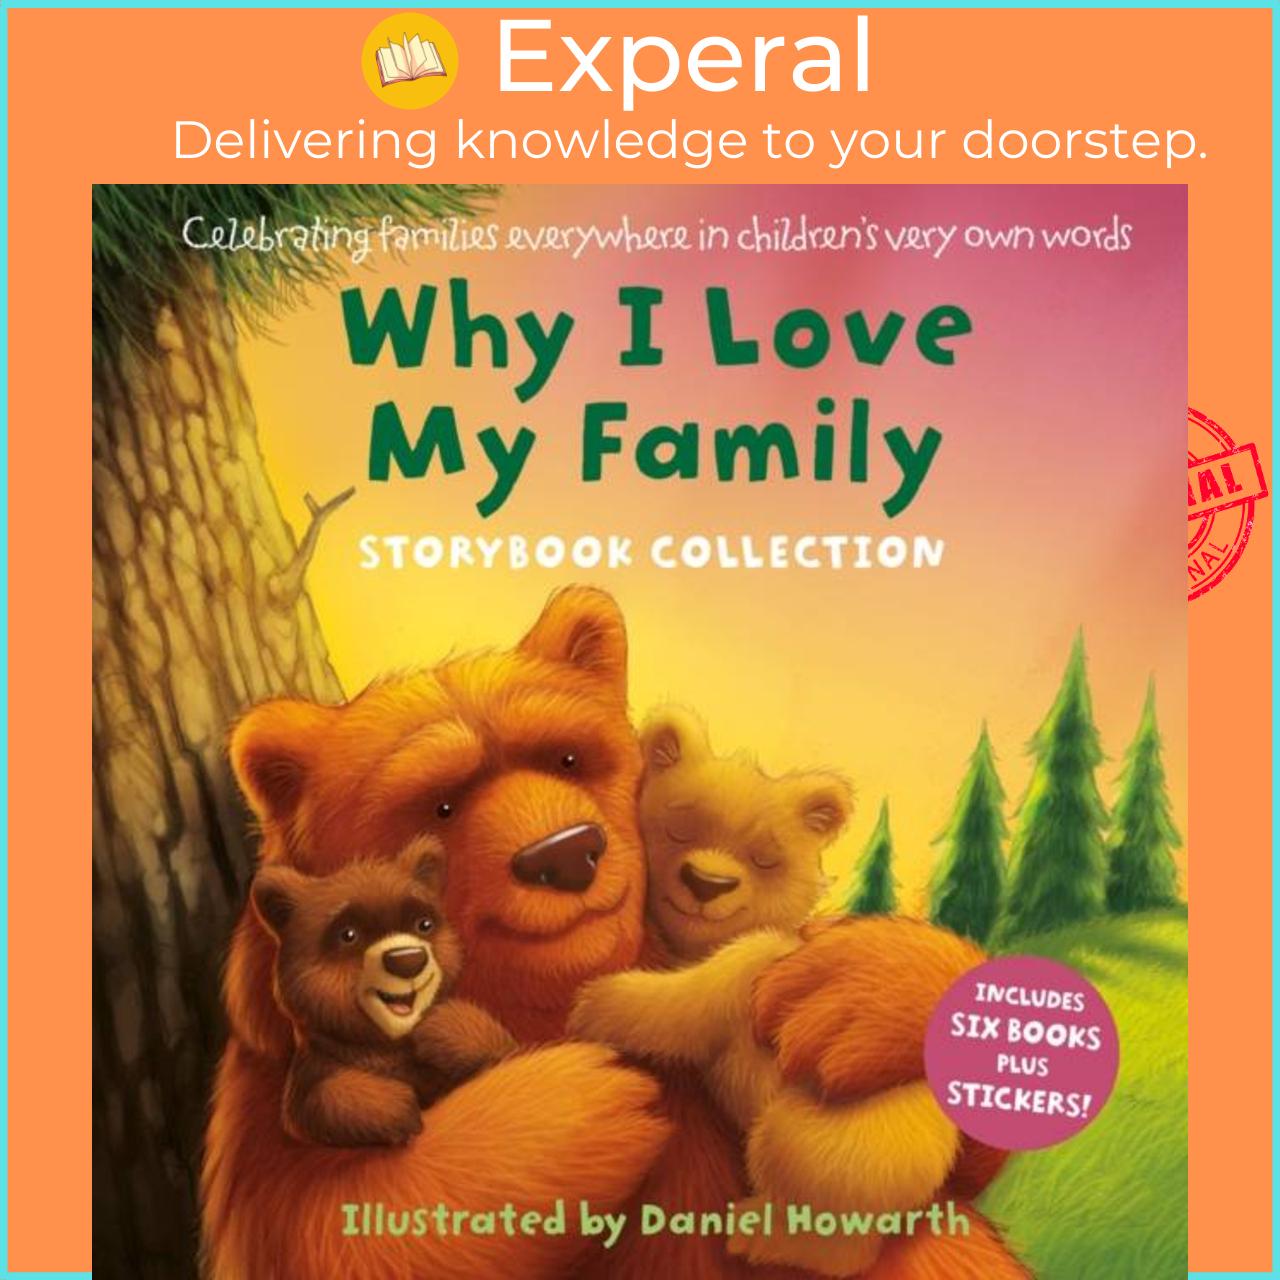 Sách - Why I Love My Family by Daniel Howarth (UK edition, hardcover)